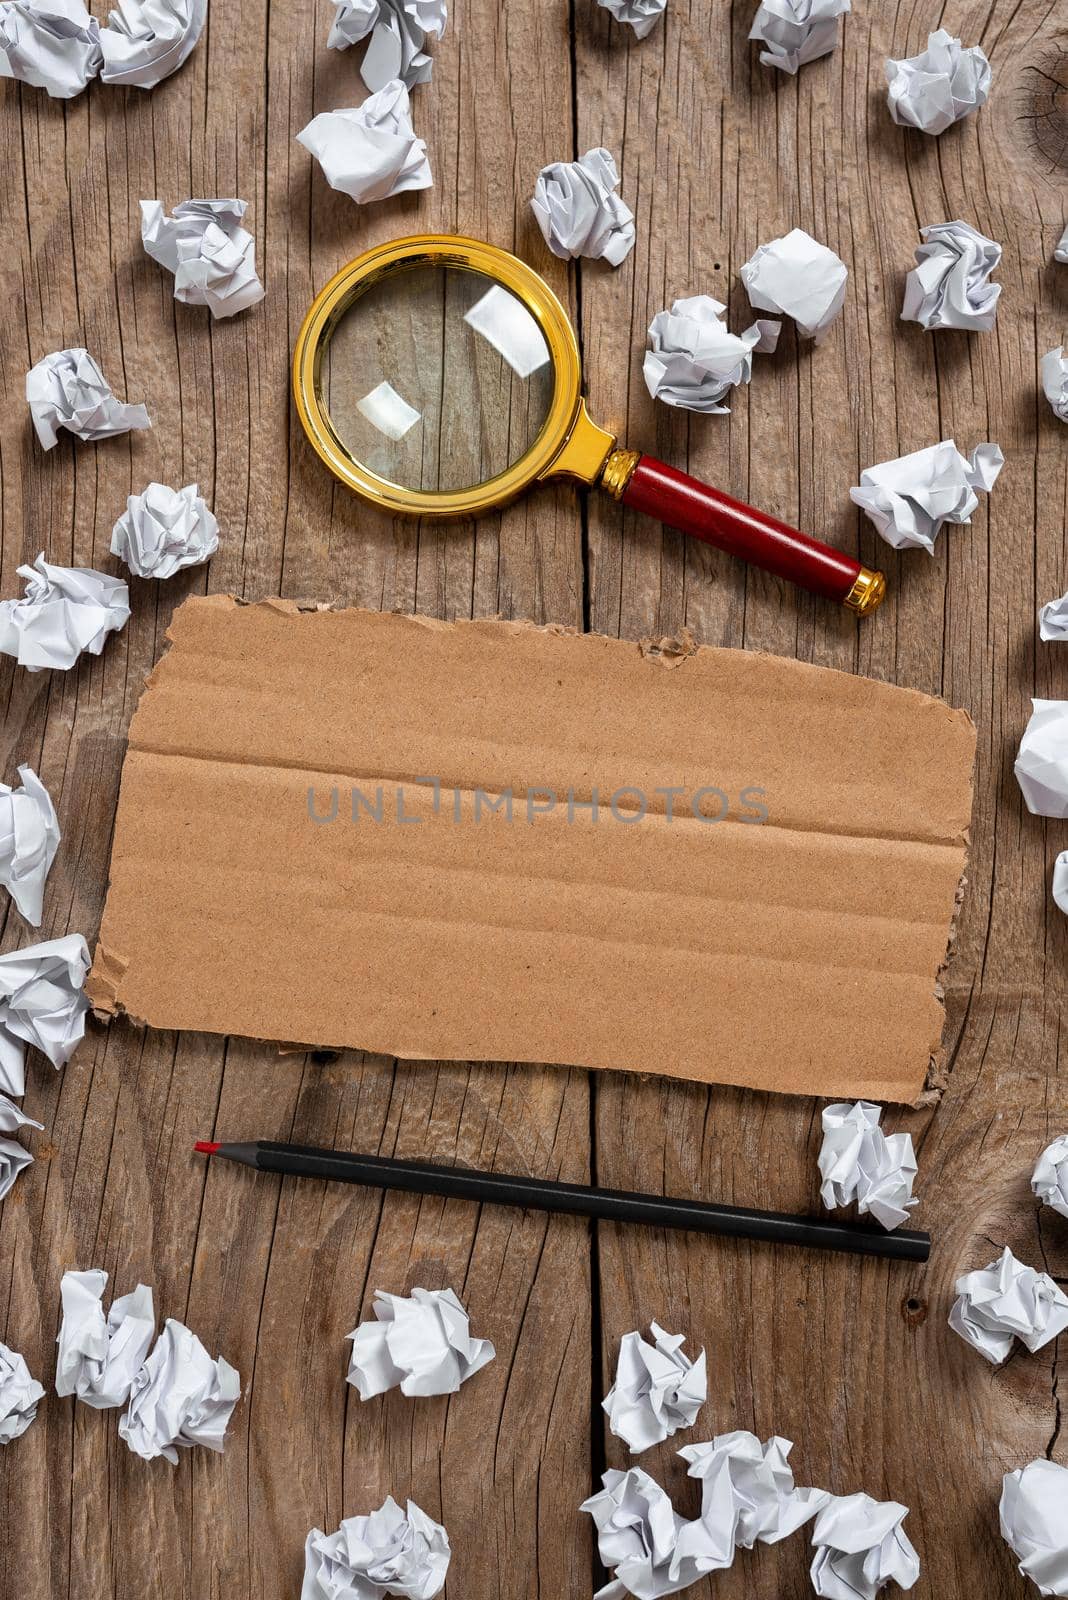 Cardboard With Important Information With Paper Wraps, Pencil And Magnifier Around. Paperboard With Crutial Message With Crumpled Notes All Over And Crayon. by nialowwa